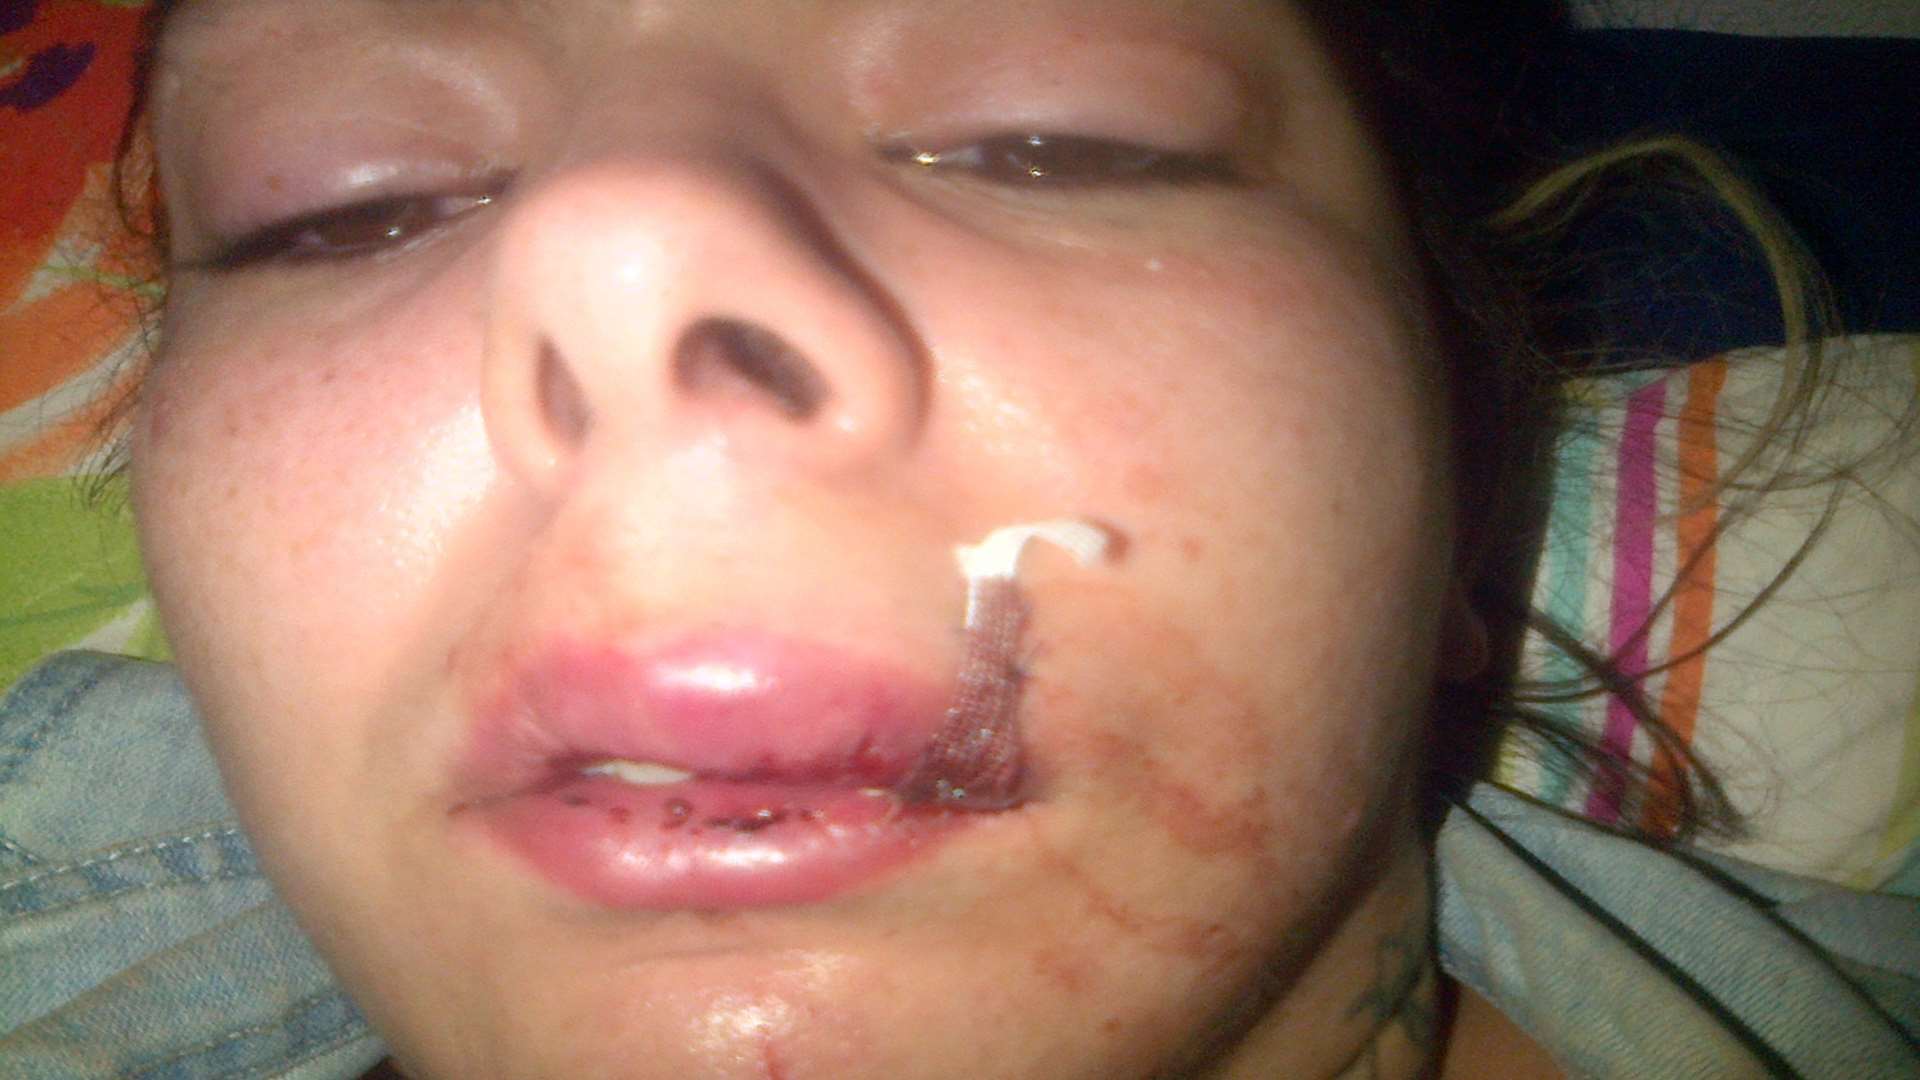 Gemma Heisley needed seven stitches after the attack